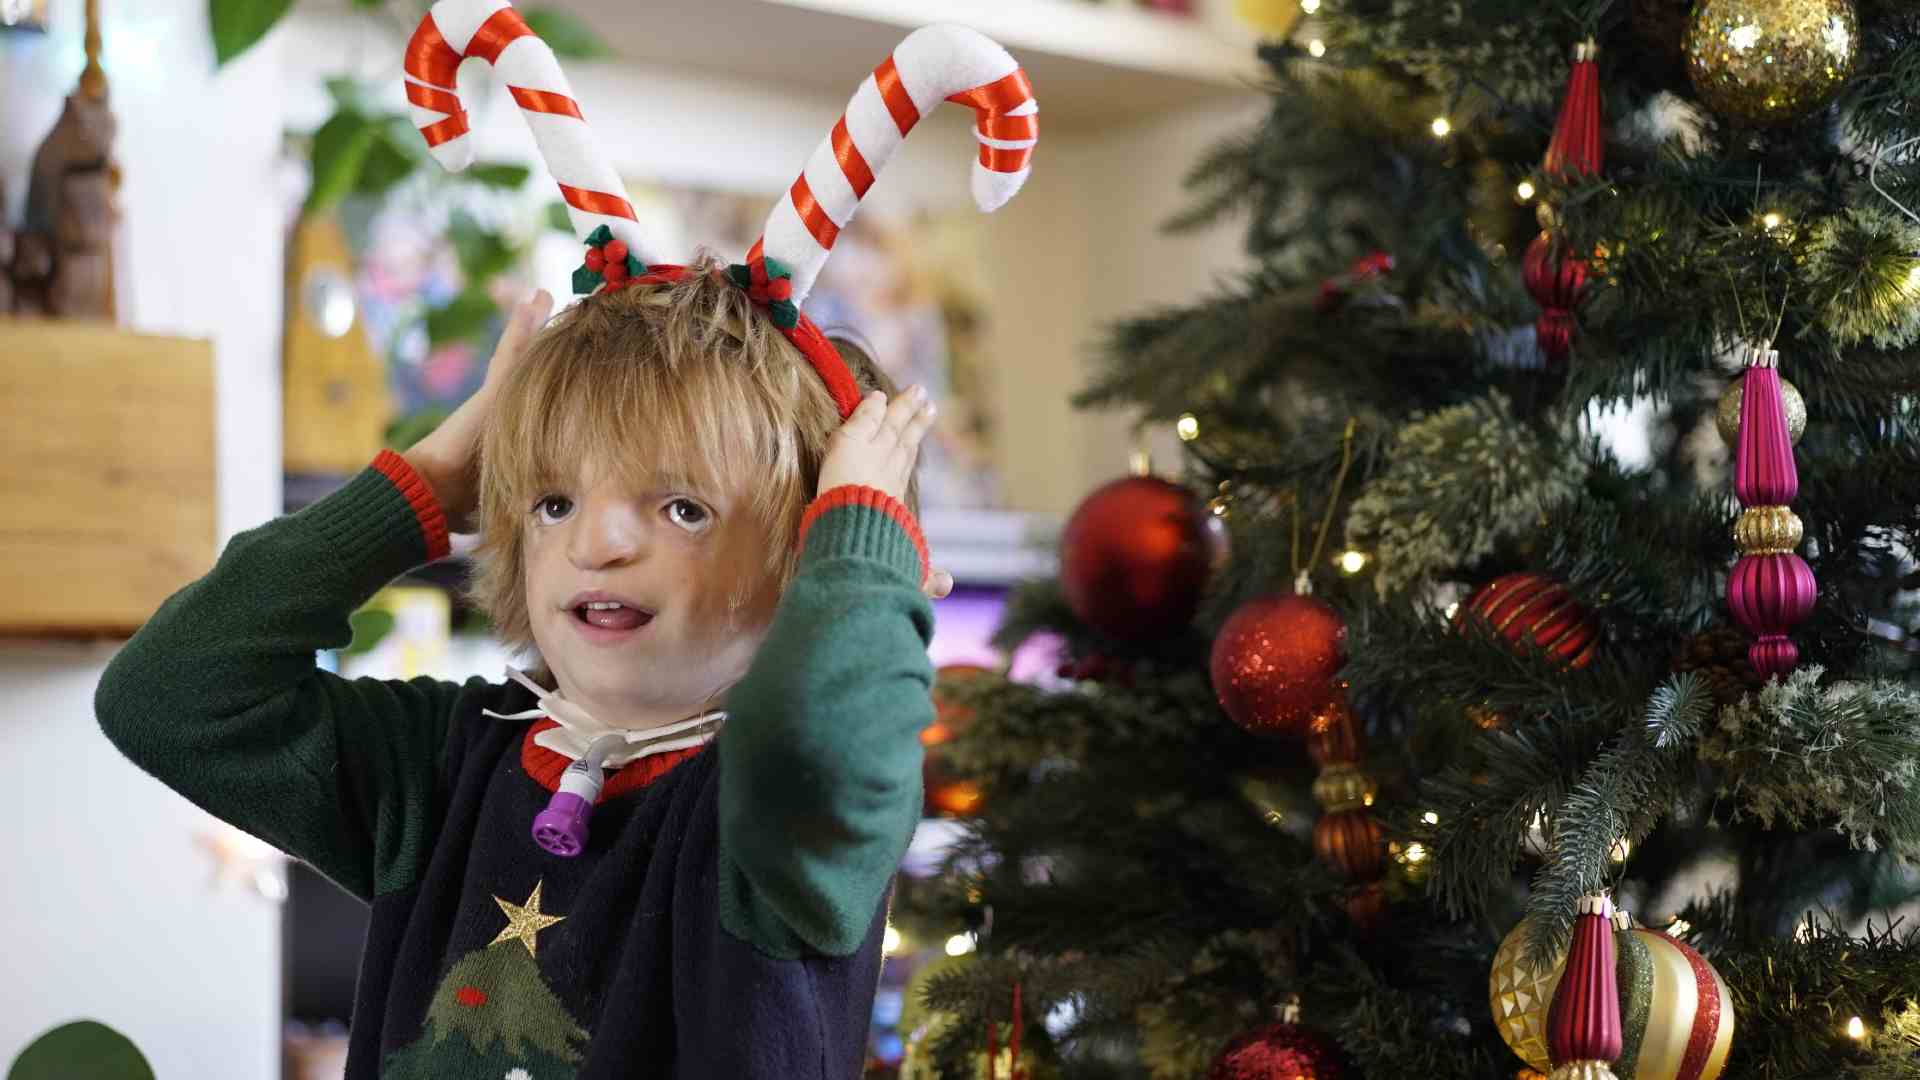 A young boy with a cranio-facial condition holds candy cane antlers on his head